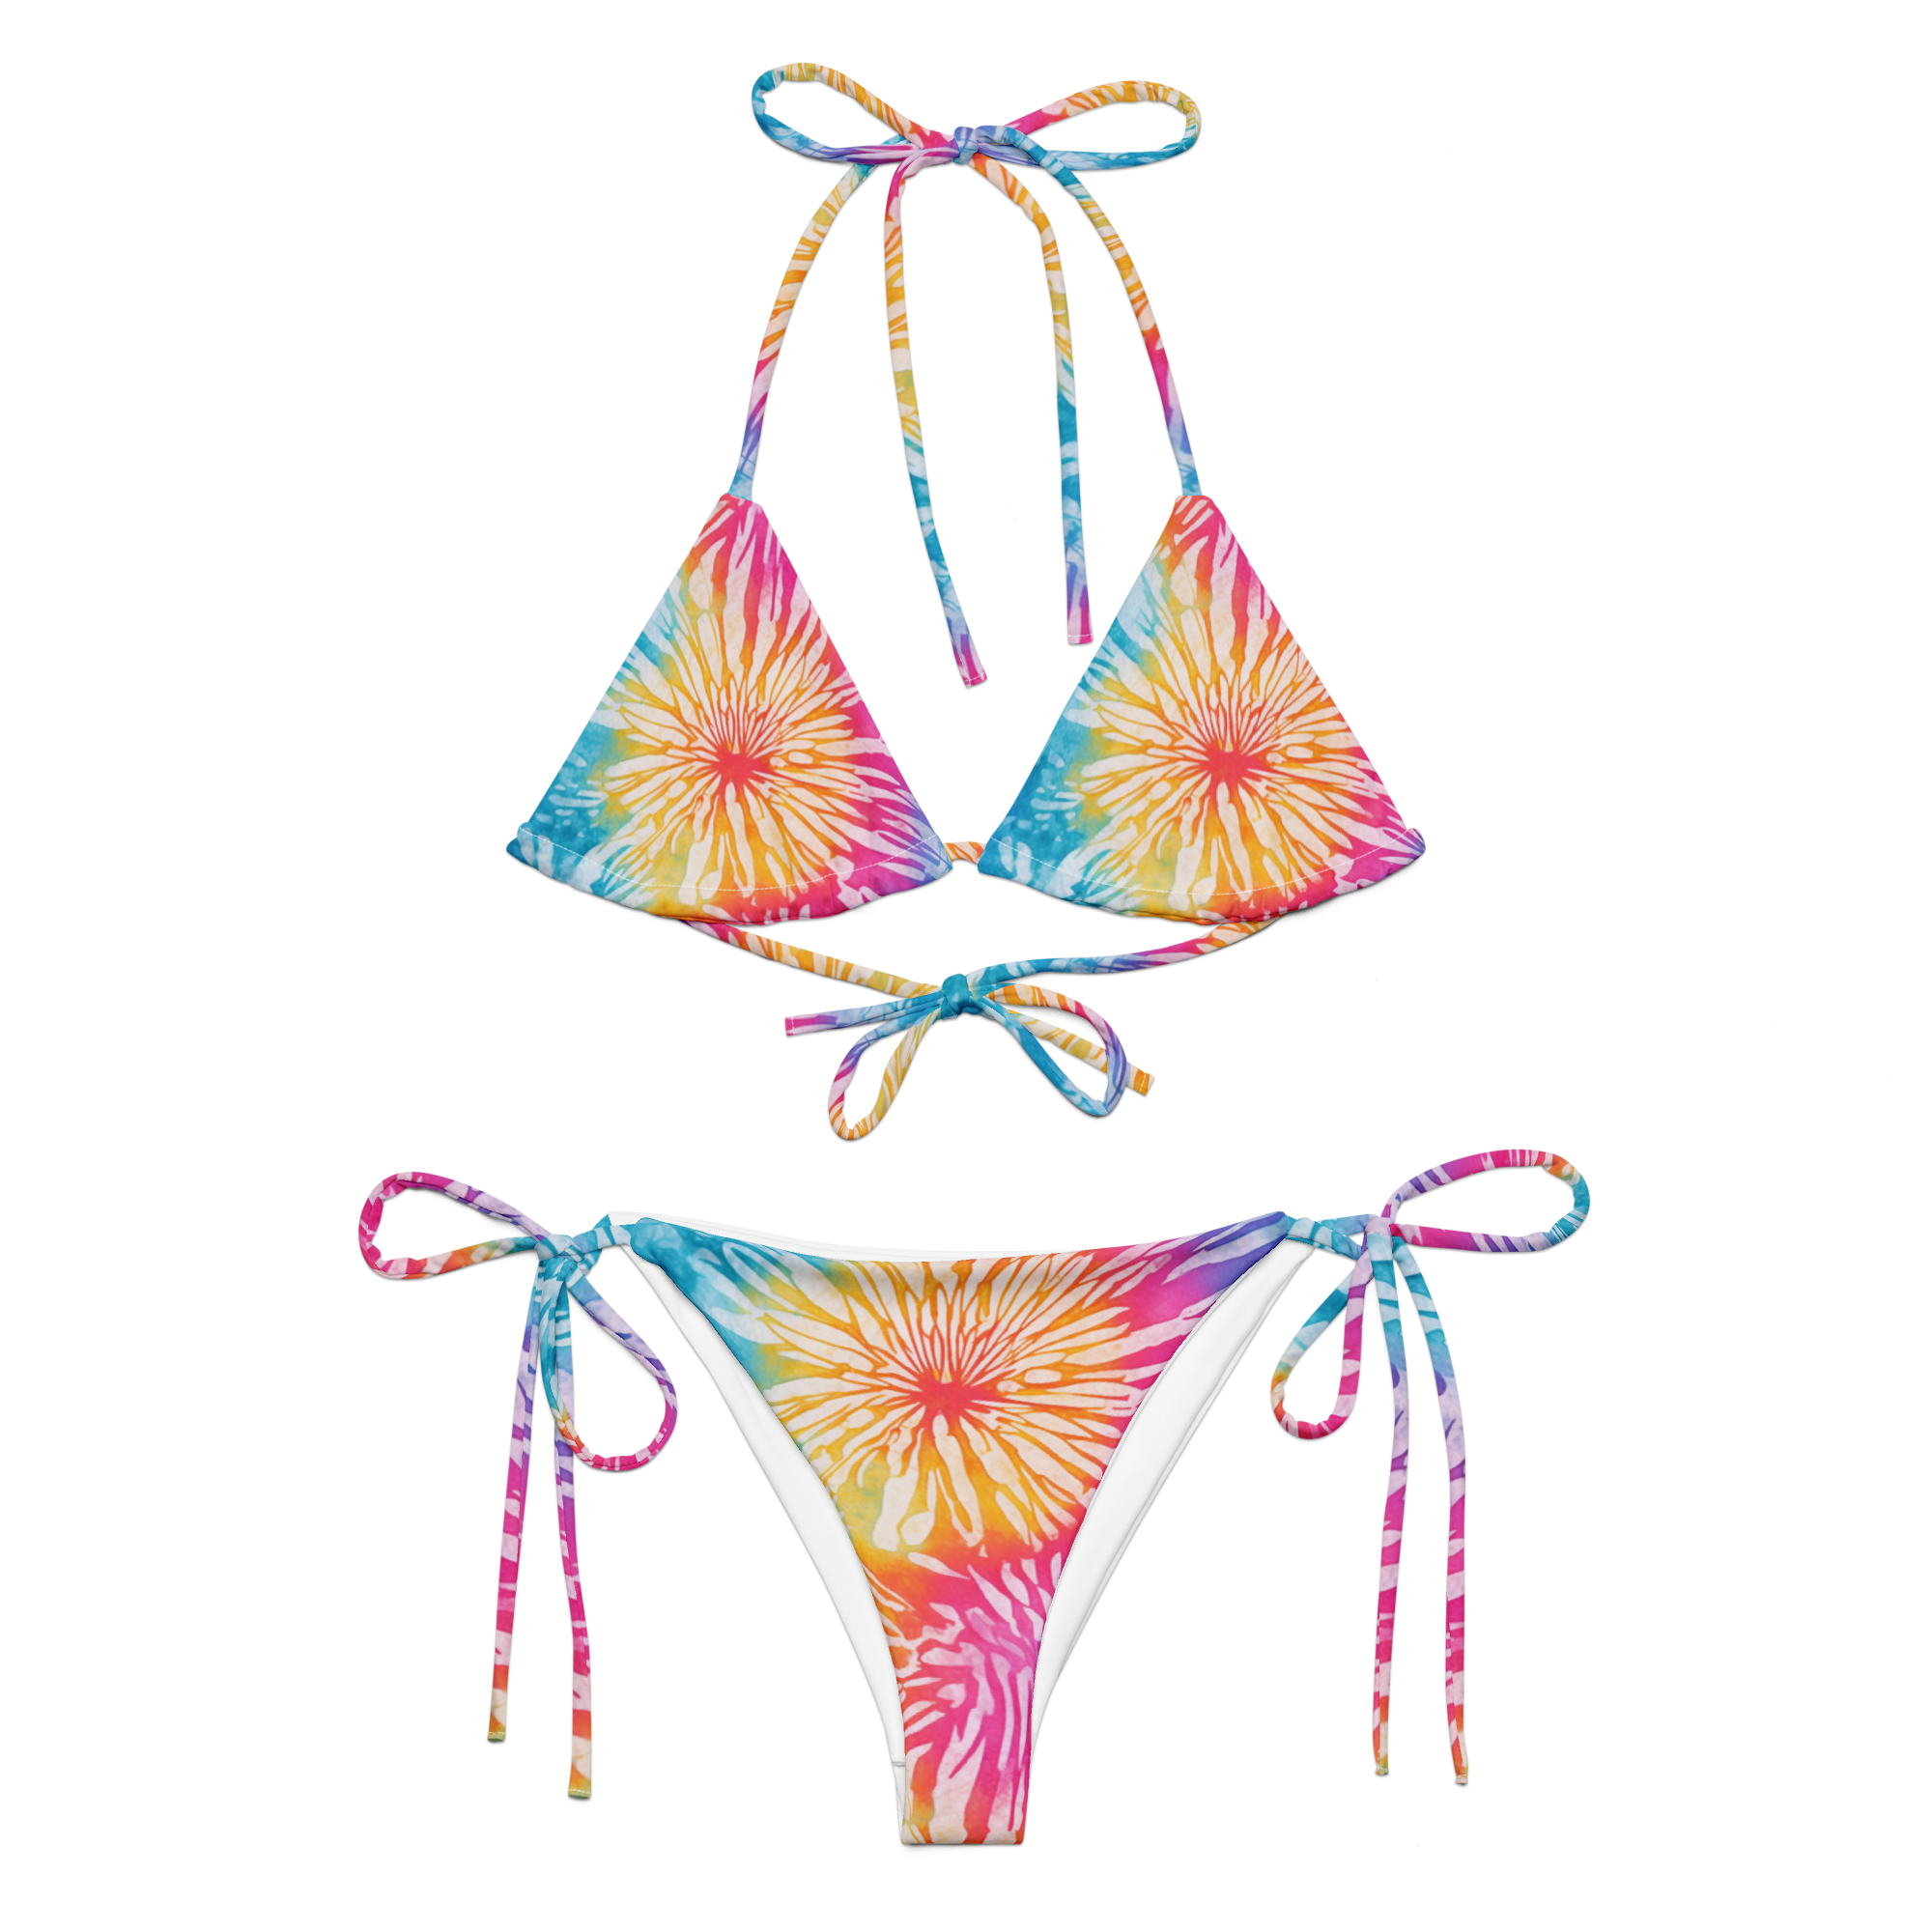 Tie Dye Delight: Women's Two-Piece Swimsuit for the Ultimate Summer Vibes Enthusiasts! - 2XS - XS - S - M - L - XL - 2XL - 3XL - 4XL - 5XL - 6XL